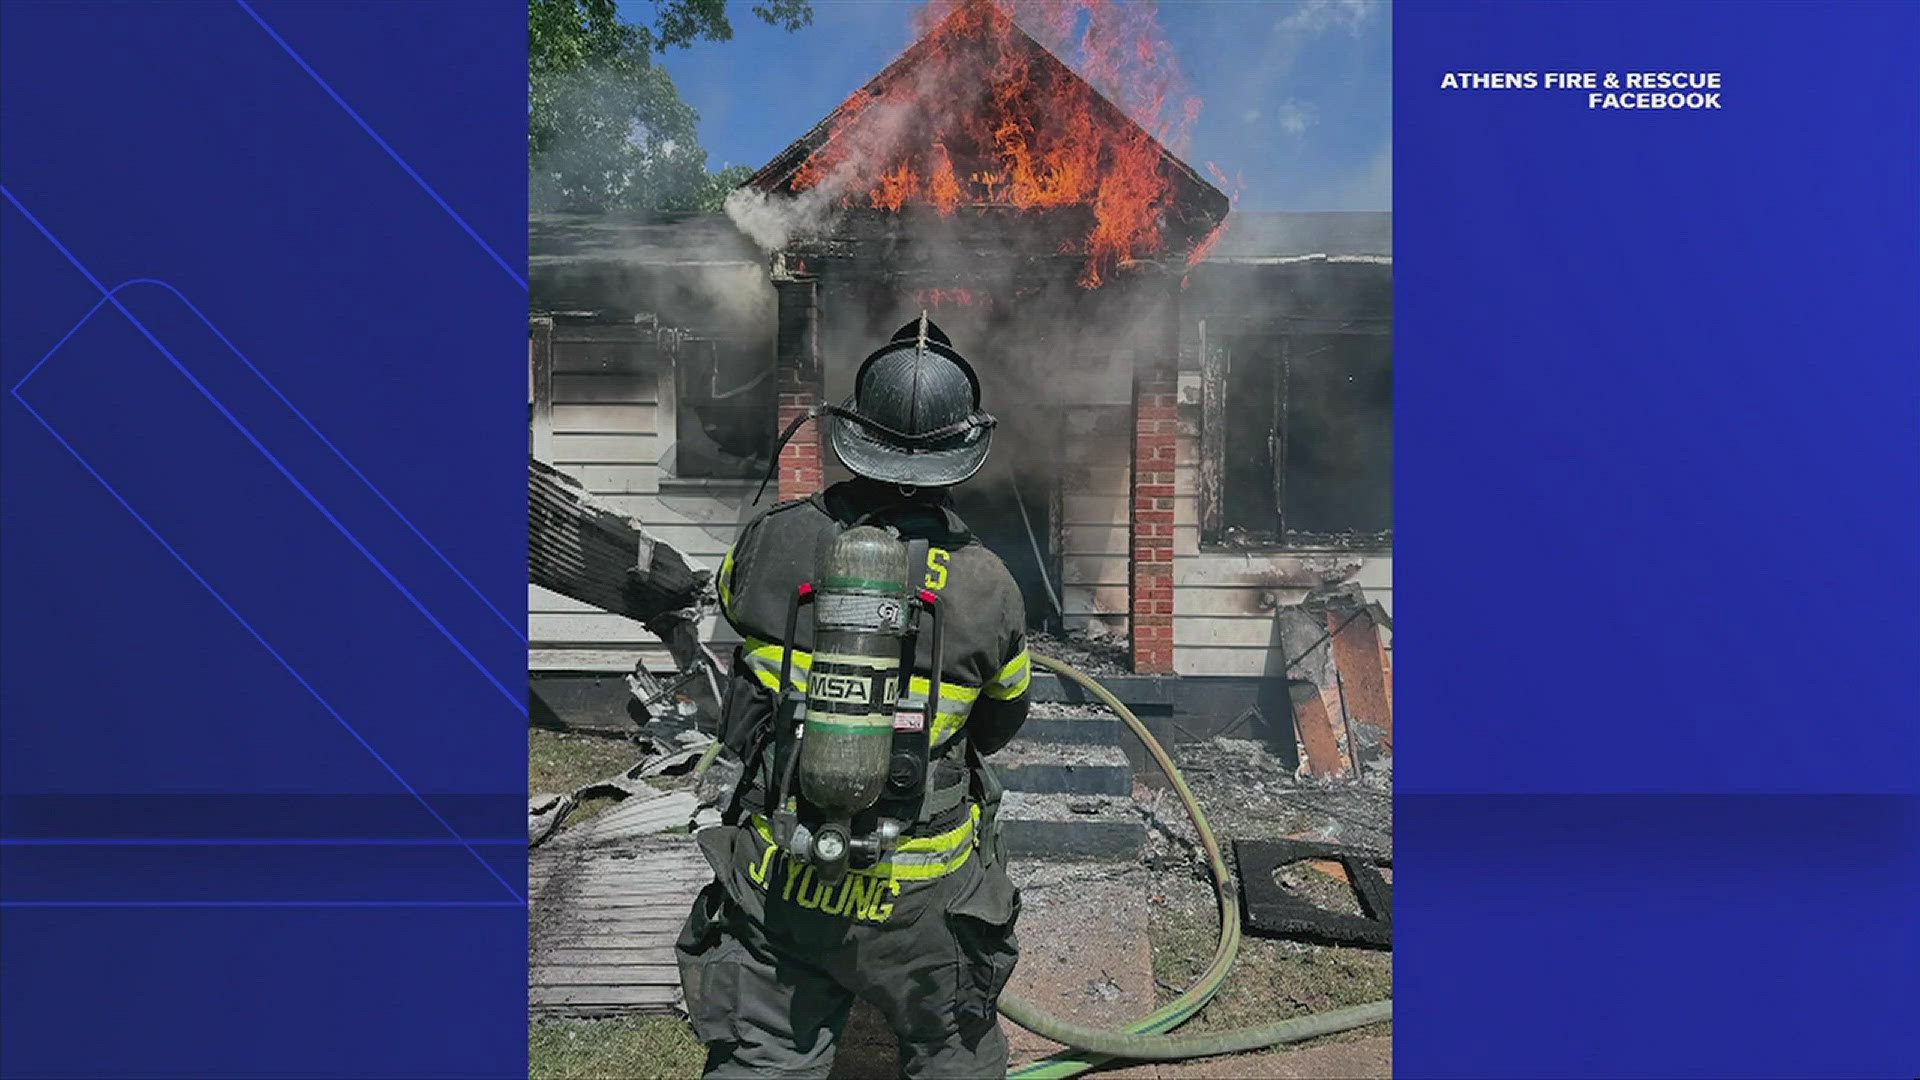 The blaze happened Sunday at a home on Maple St., authorities said.